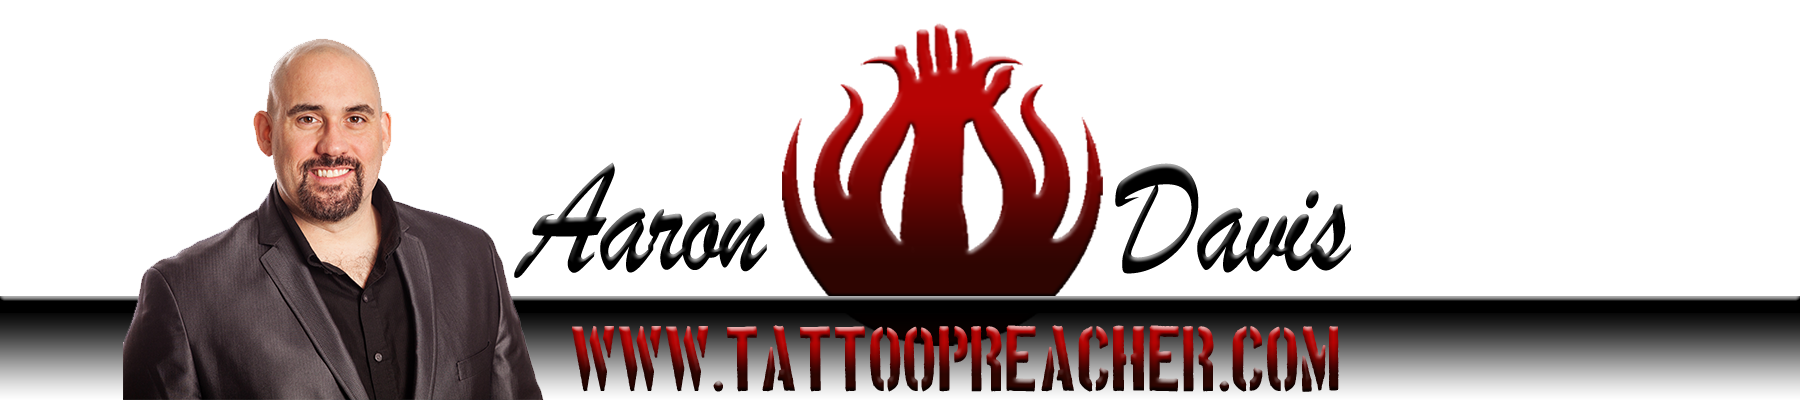 Official Site of the Tattooed Preacher